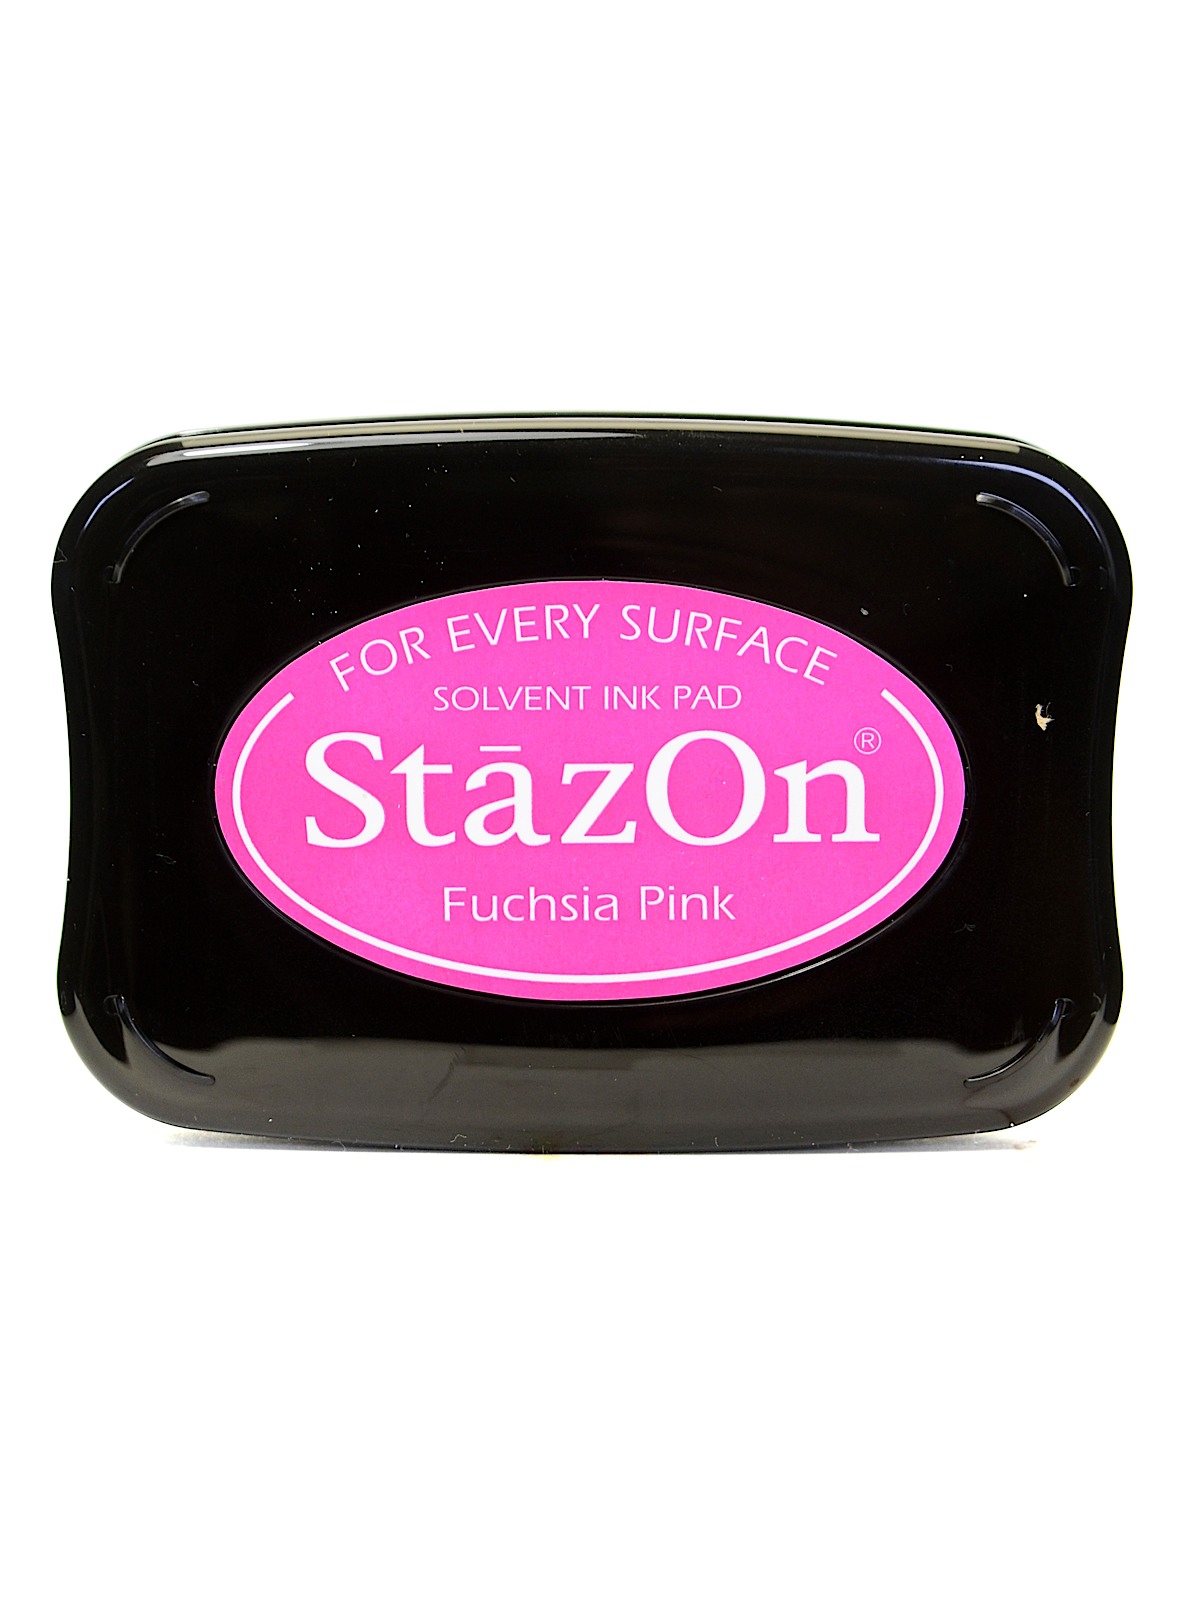 Stazon Solvent Ink Fuchsia Pink 3.75 In. X 2.625 In. Full-size Pad